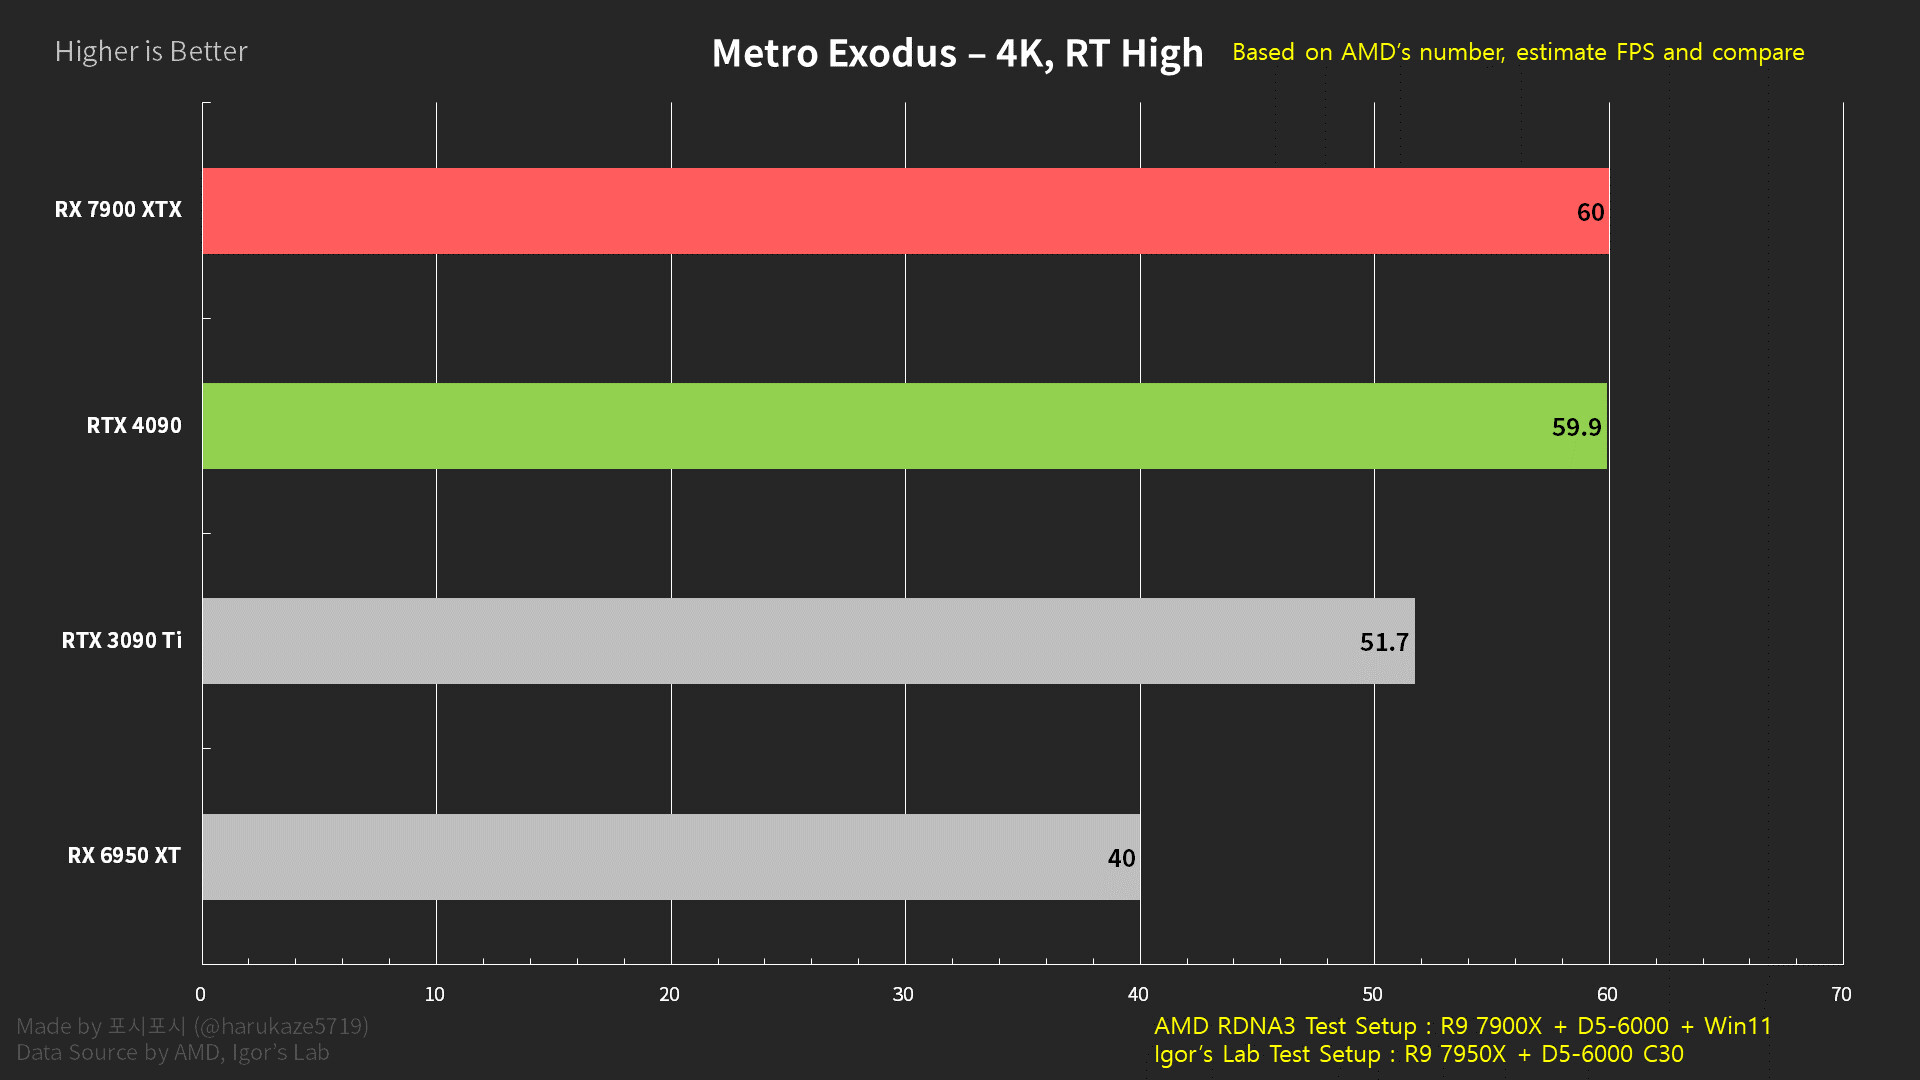 GeForce RTX 4090 game performance estimates leave RTX 3090 and RX